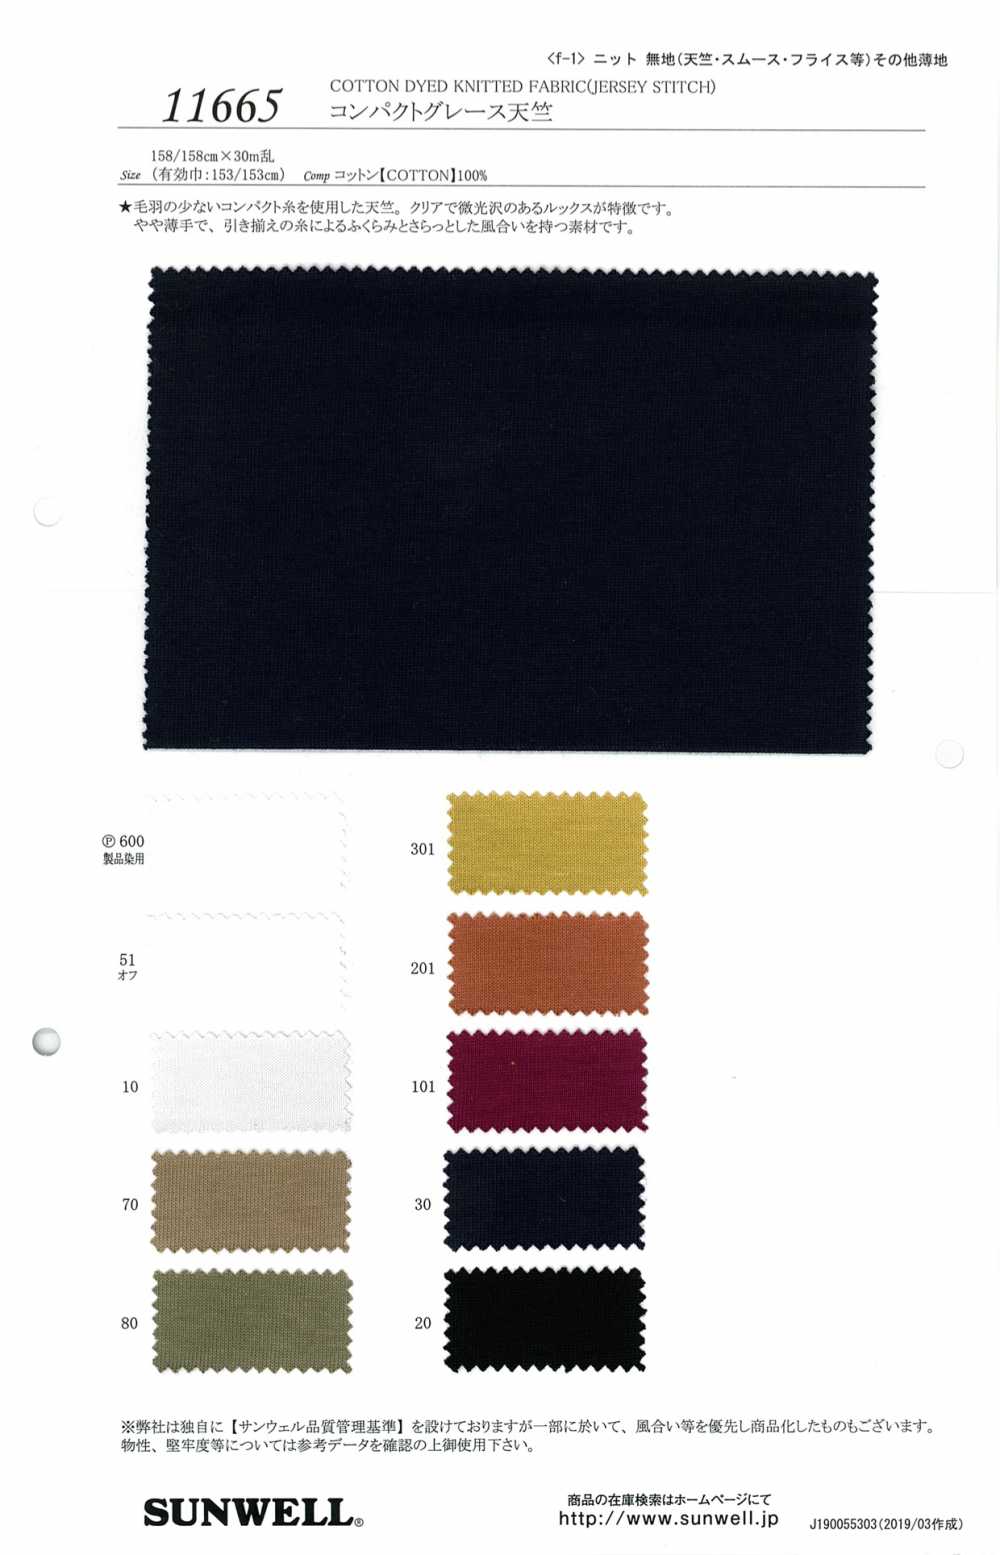 11665 Maillot Compacto Grace[Fabrica Textil] SUNWELL